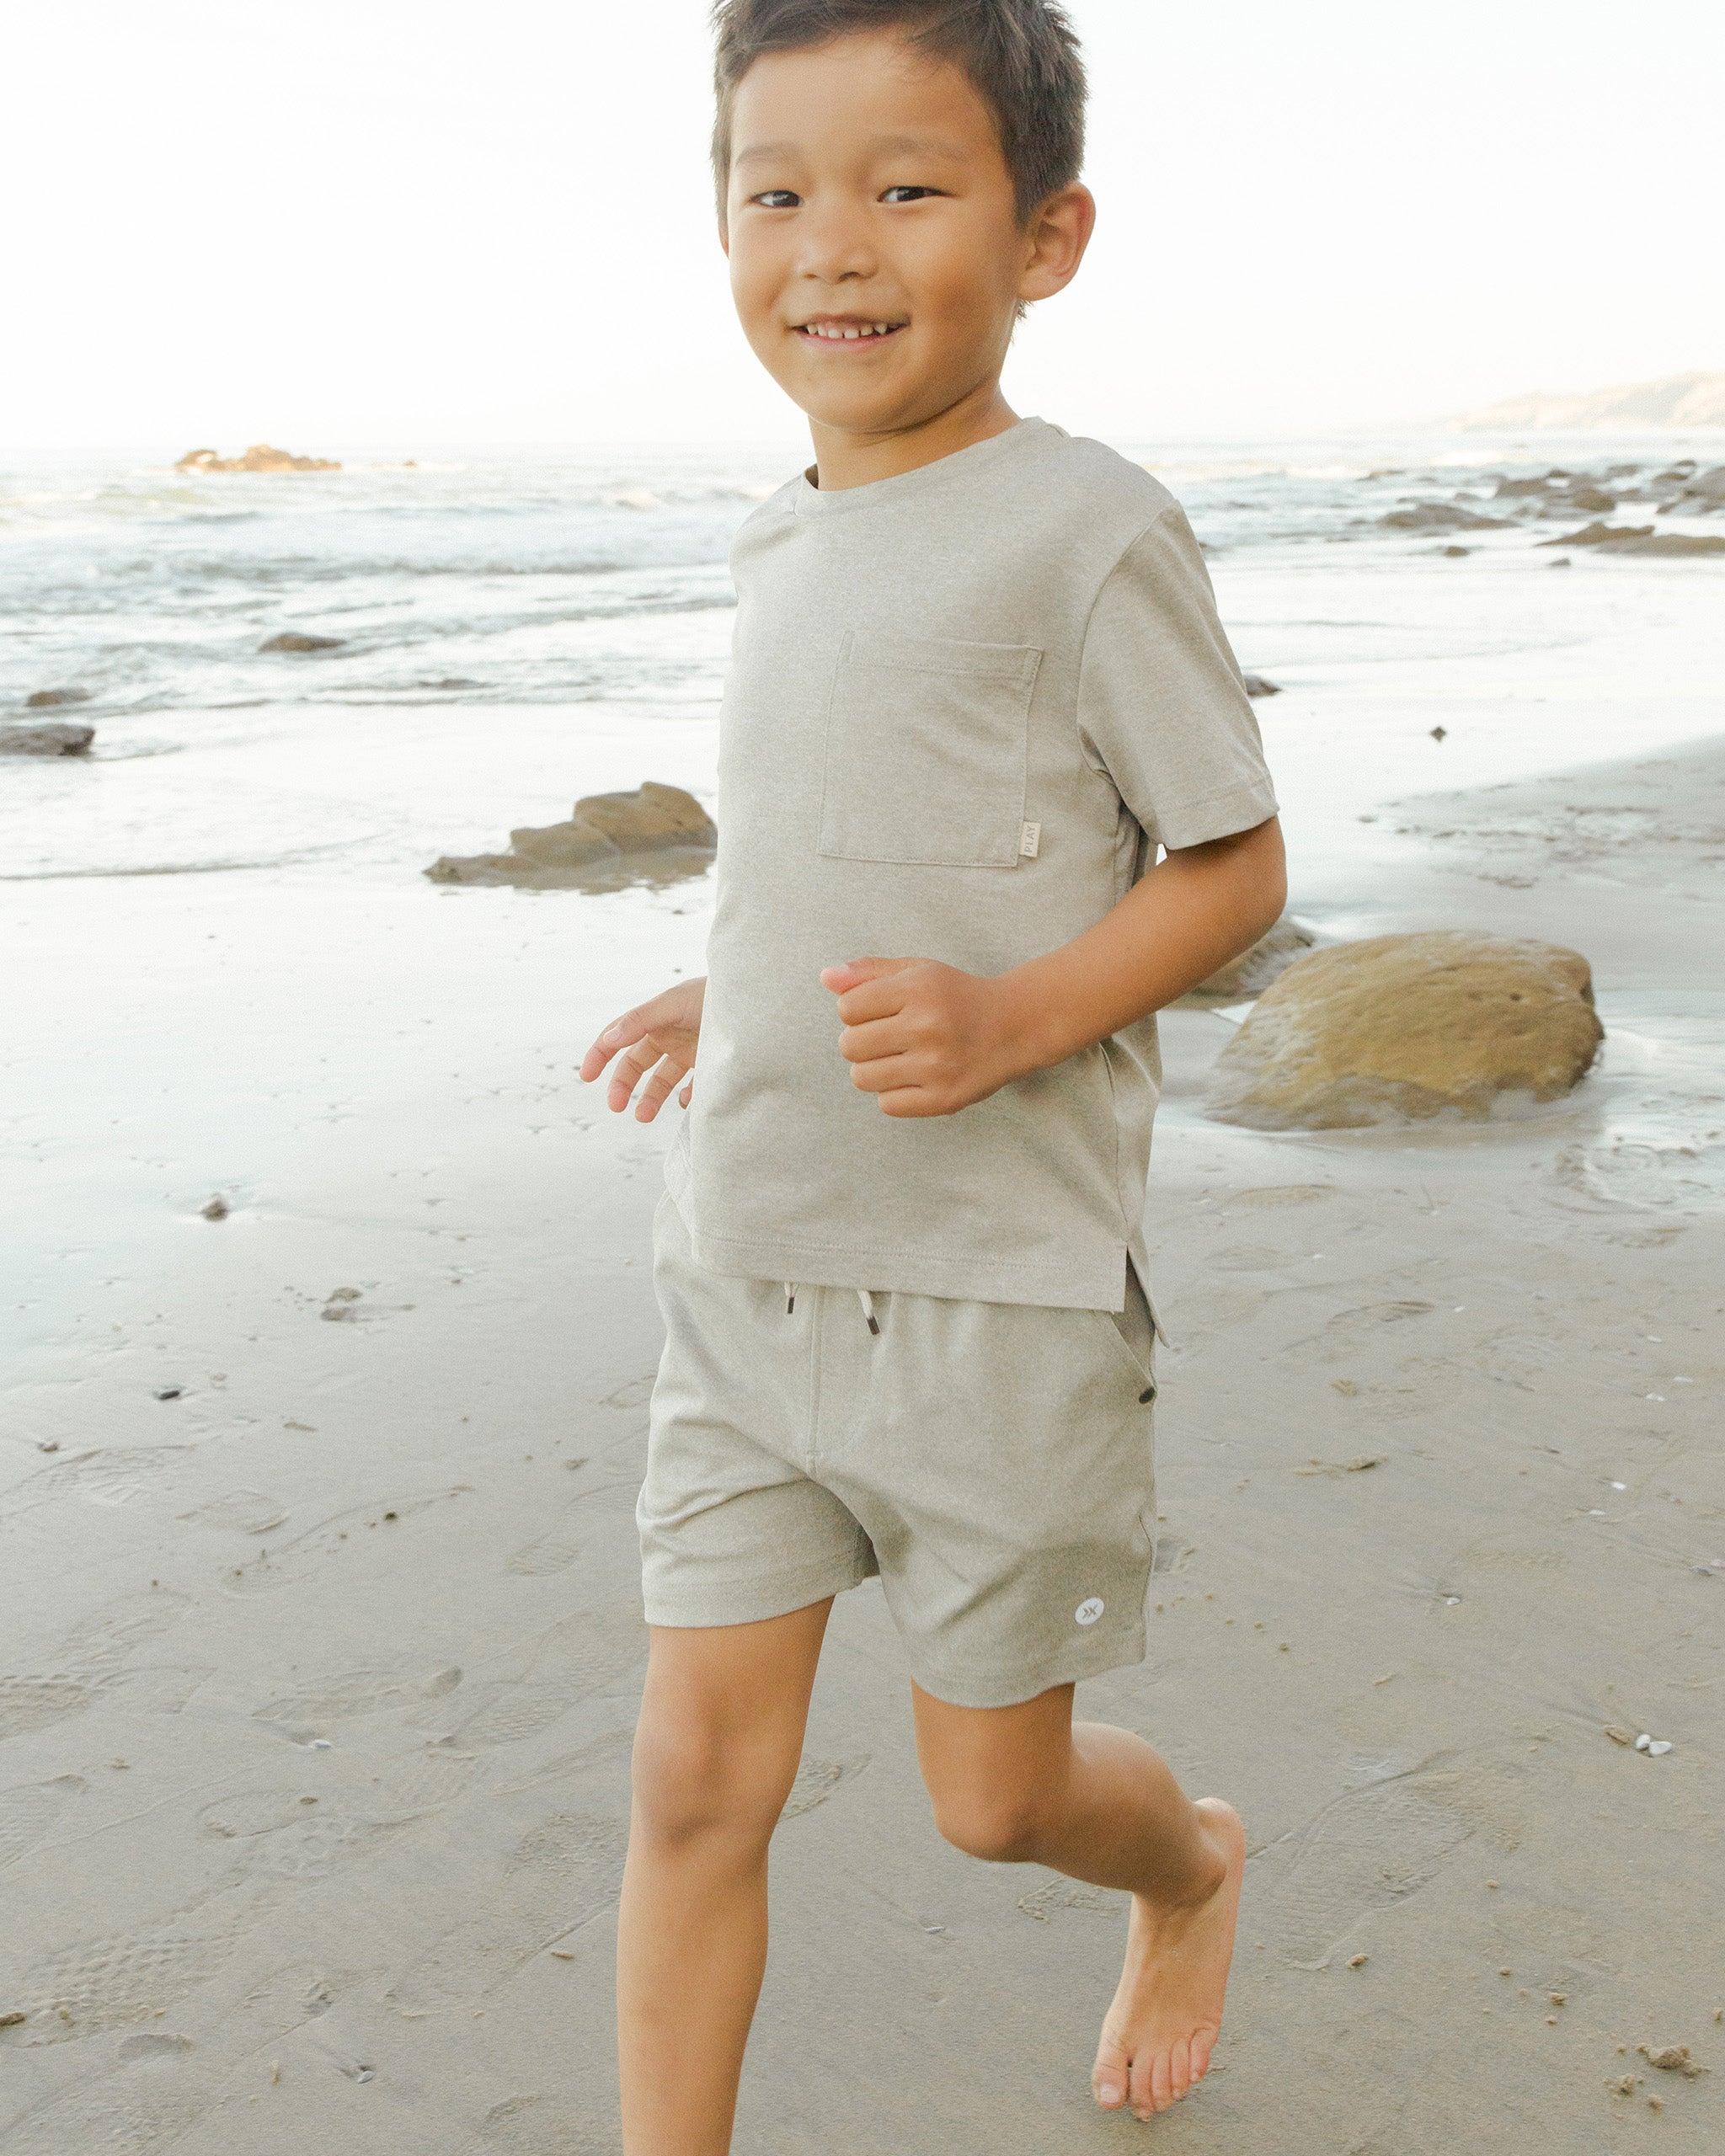 Oceanside Tech Short || Heathered Sage - Rylee + Cru | Kids Clothes | Trendy Baby Clothes | Modern Infant Outfits |